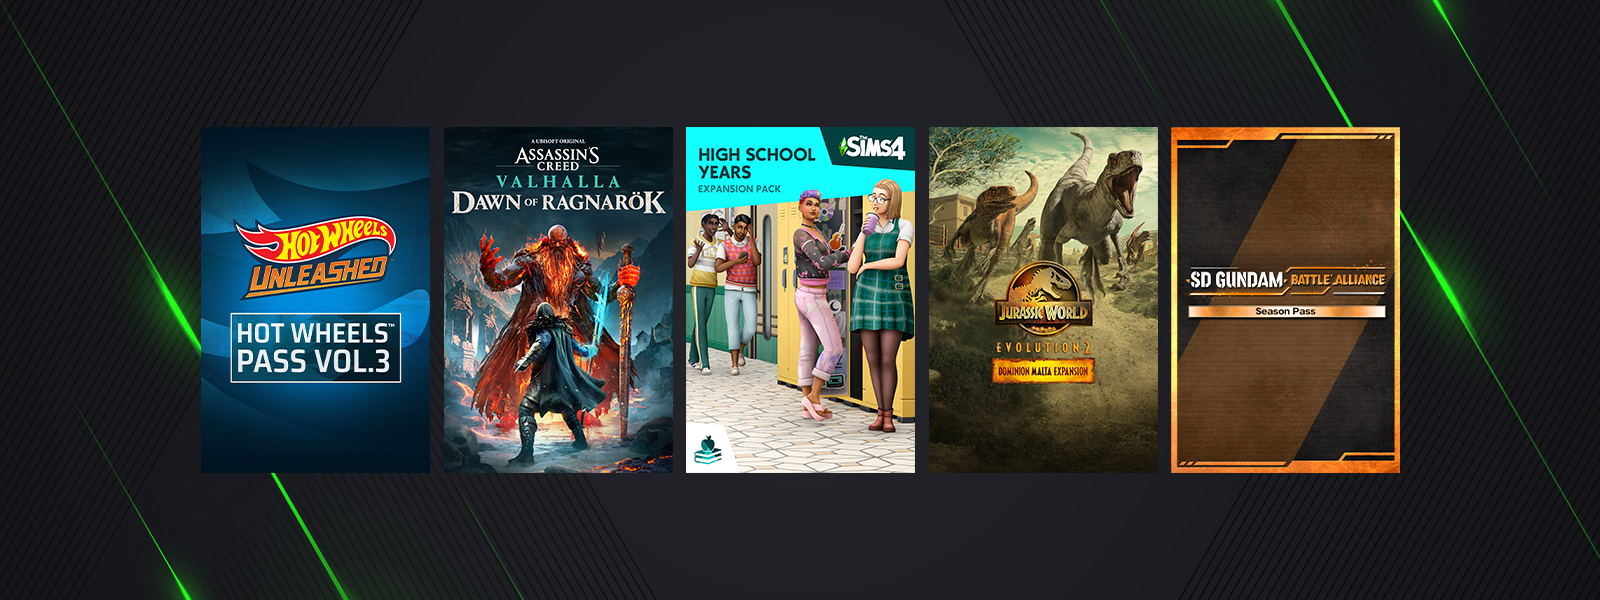 Box art from games that are part of the Game Pass Add-on Sale, including The Sims™ 4 High School Years Expansion Pack, Assassin's Creed® Valhalla: Dawn of Ragnarök, and Jurassic World Evolution 2: Dominion Malta Expansion.